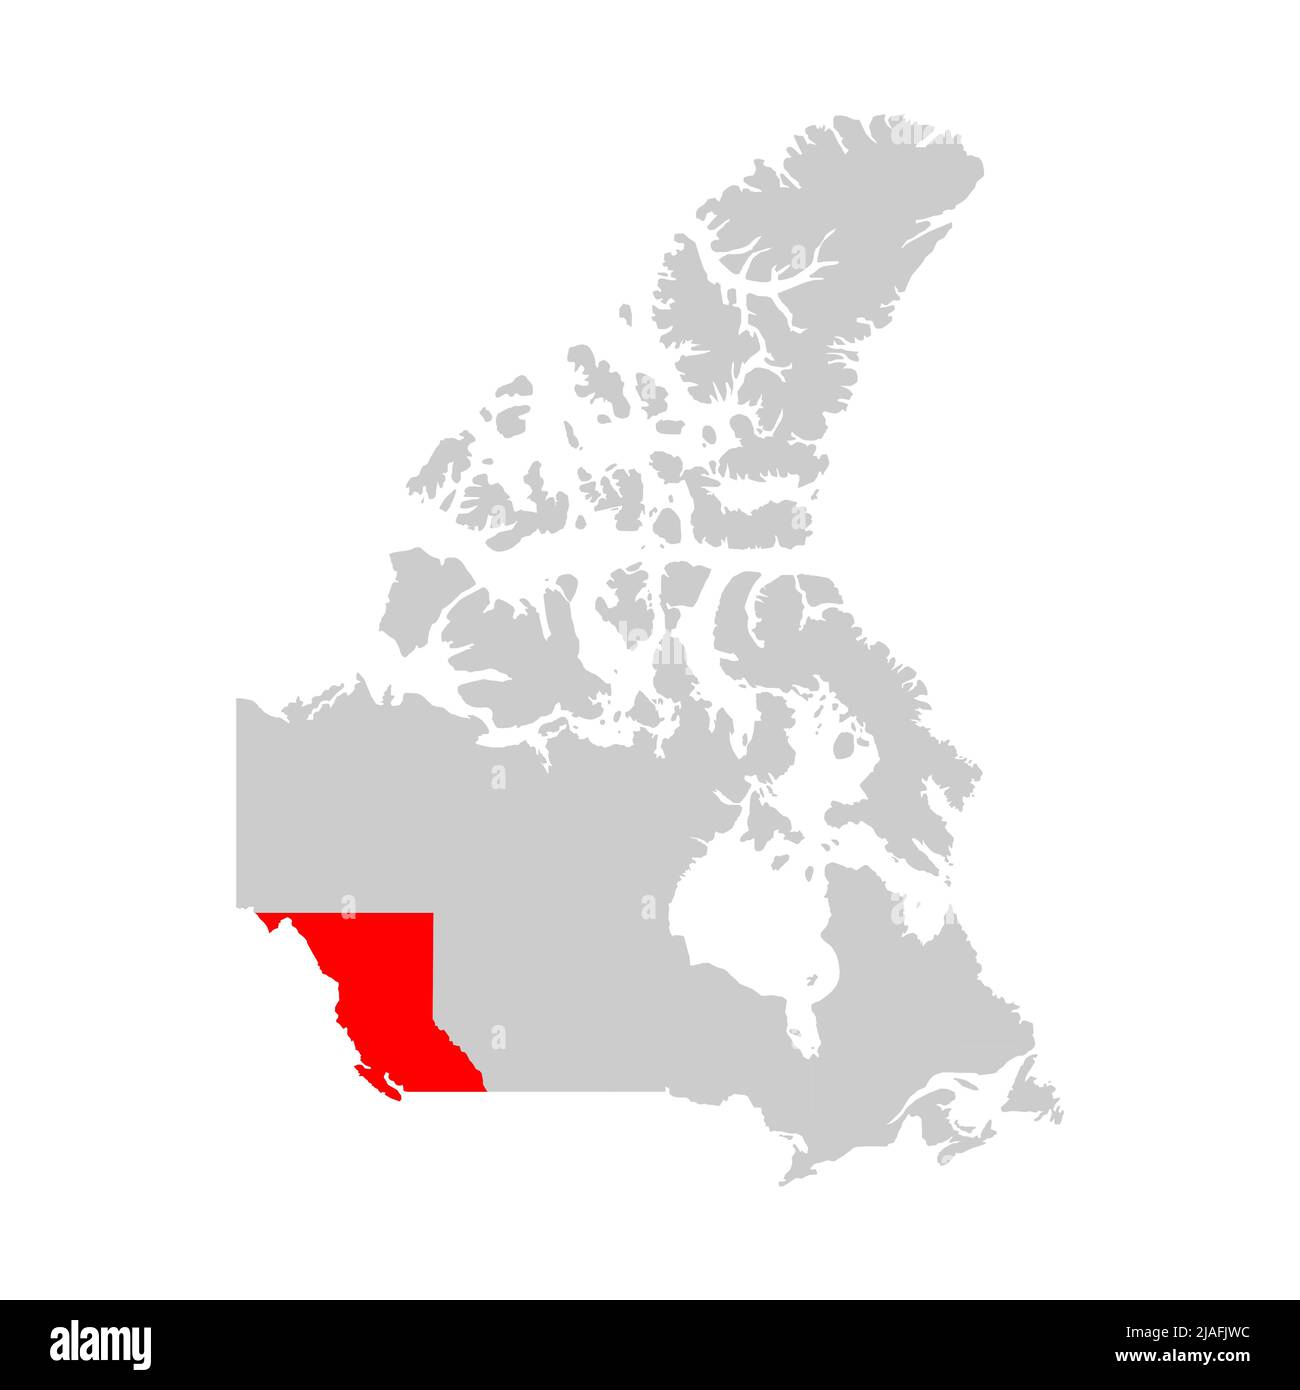 British columbia highlighted on the map of Canada Stock Vector